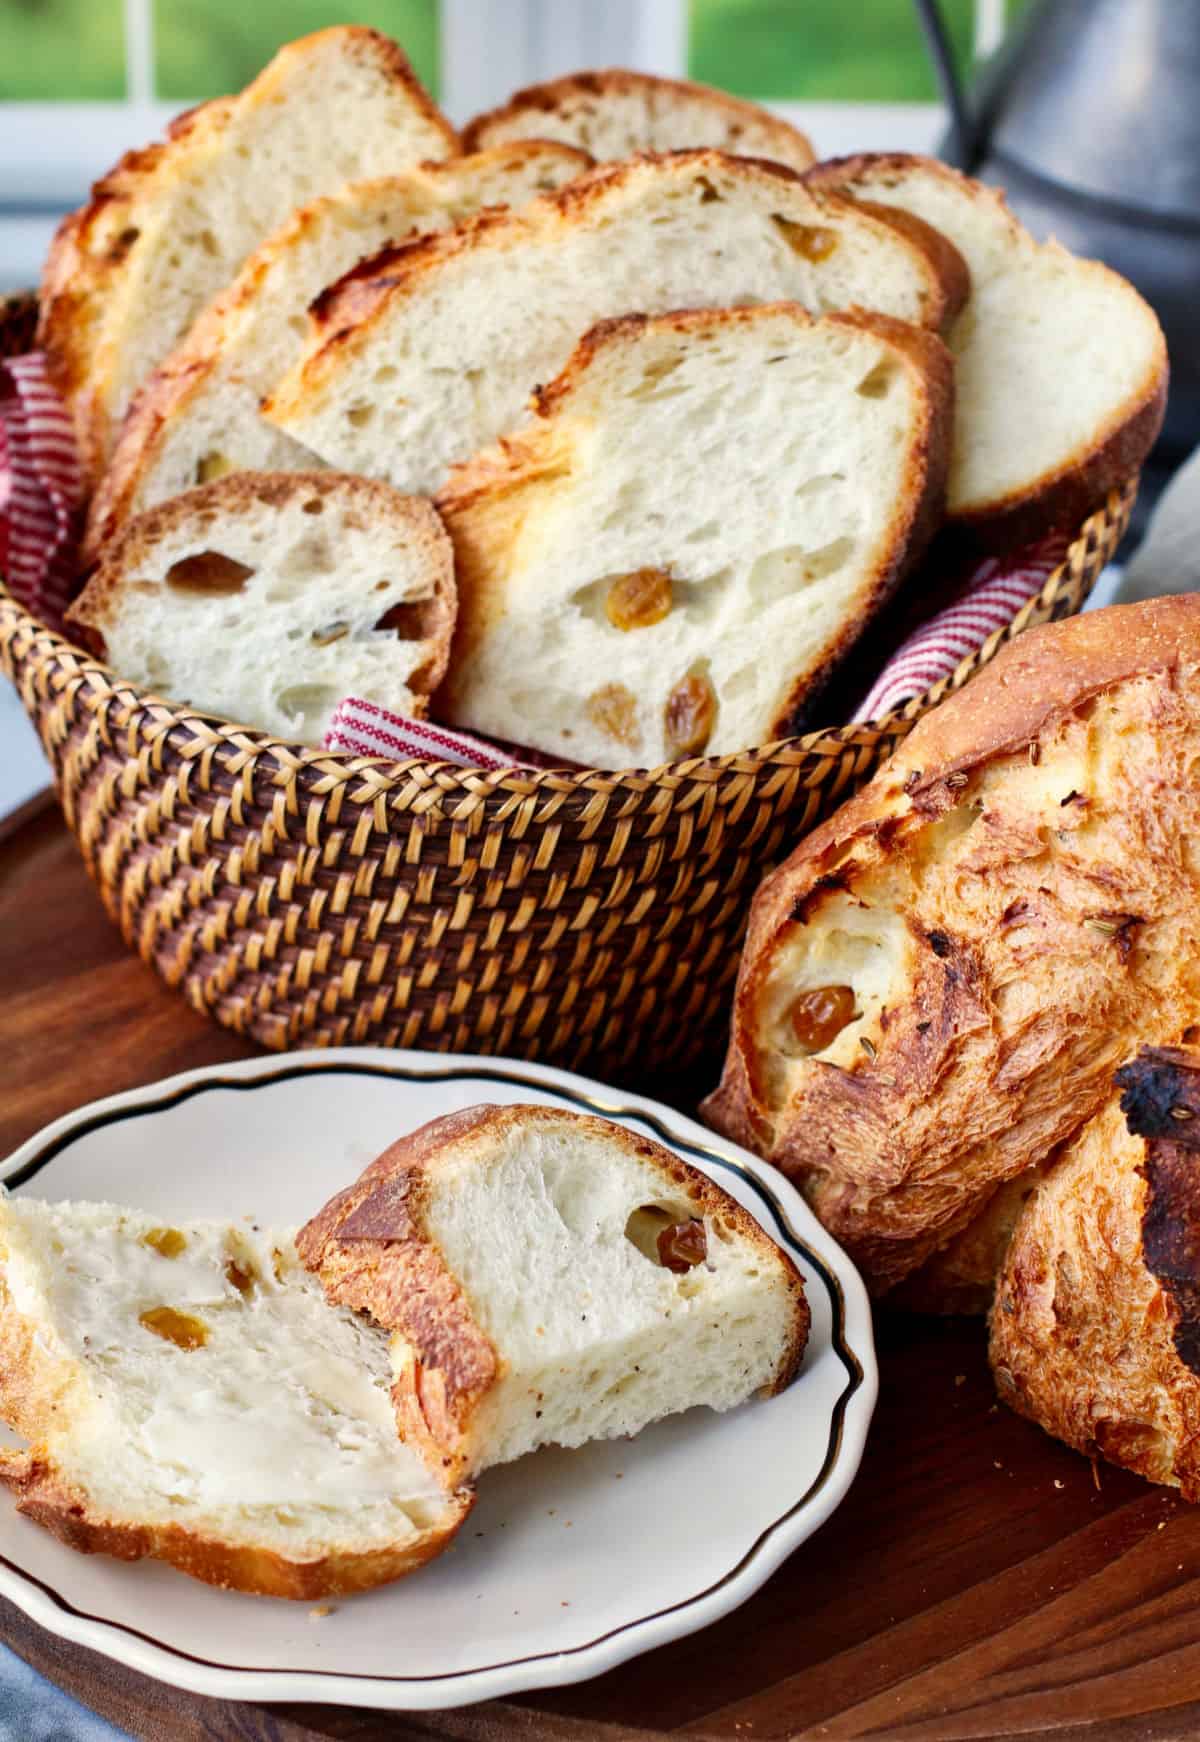 Fennel and Golden Raisin Bread in a basket.